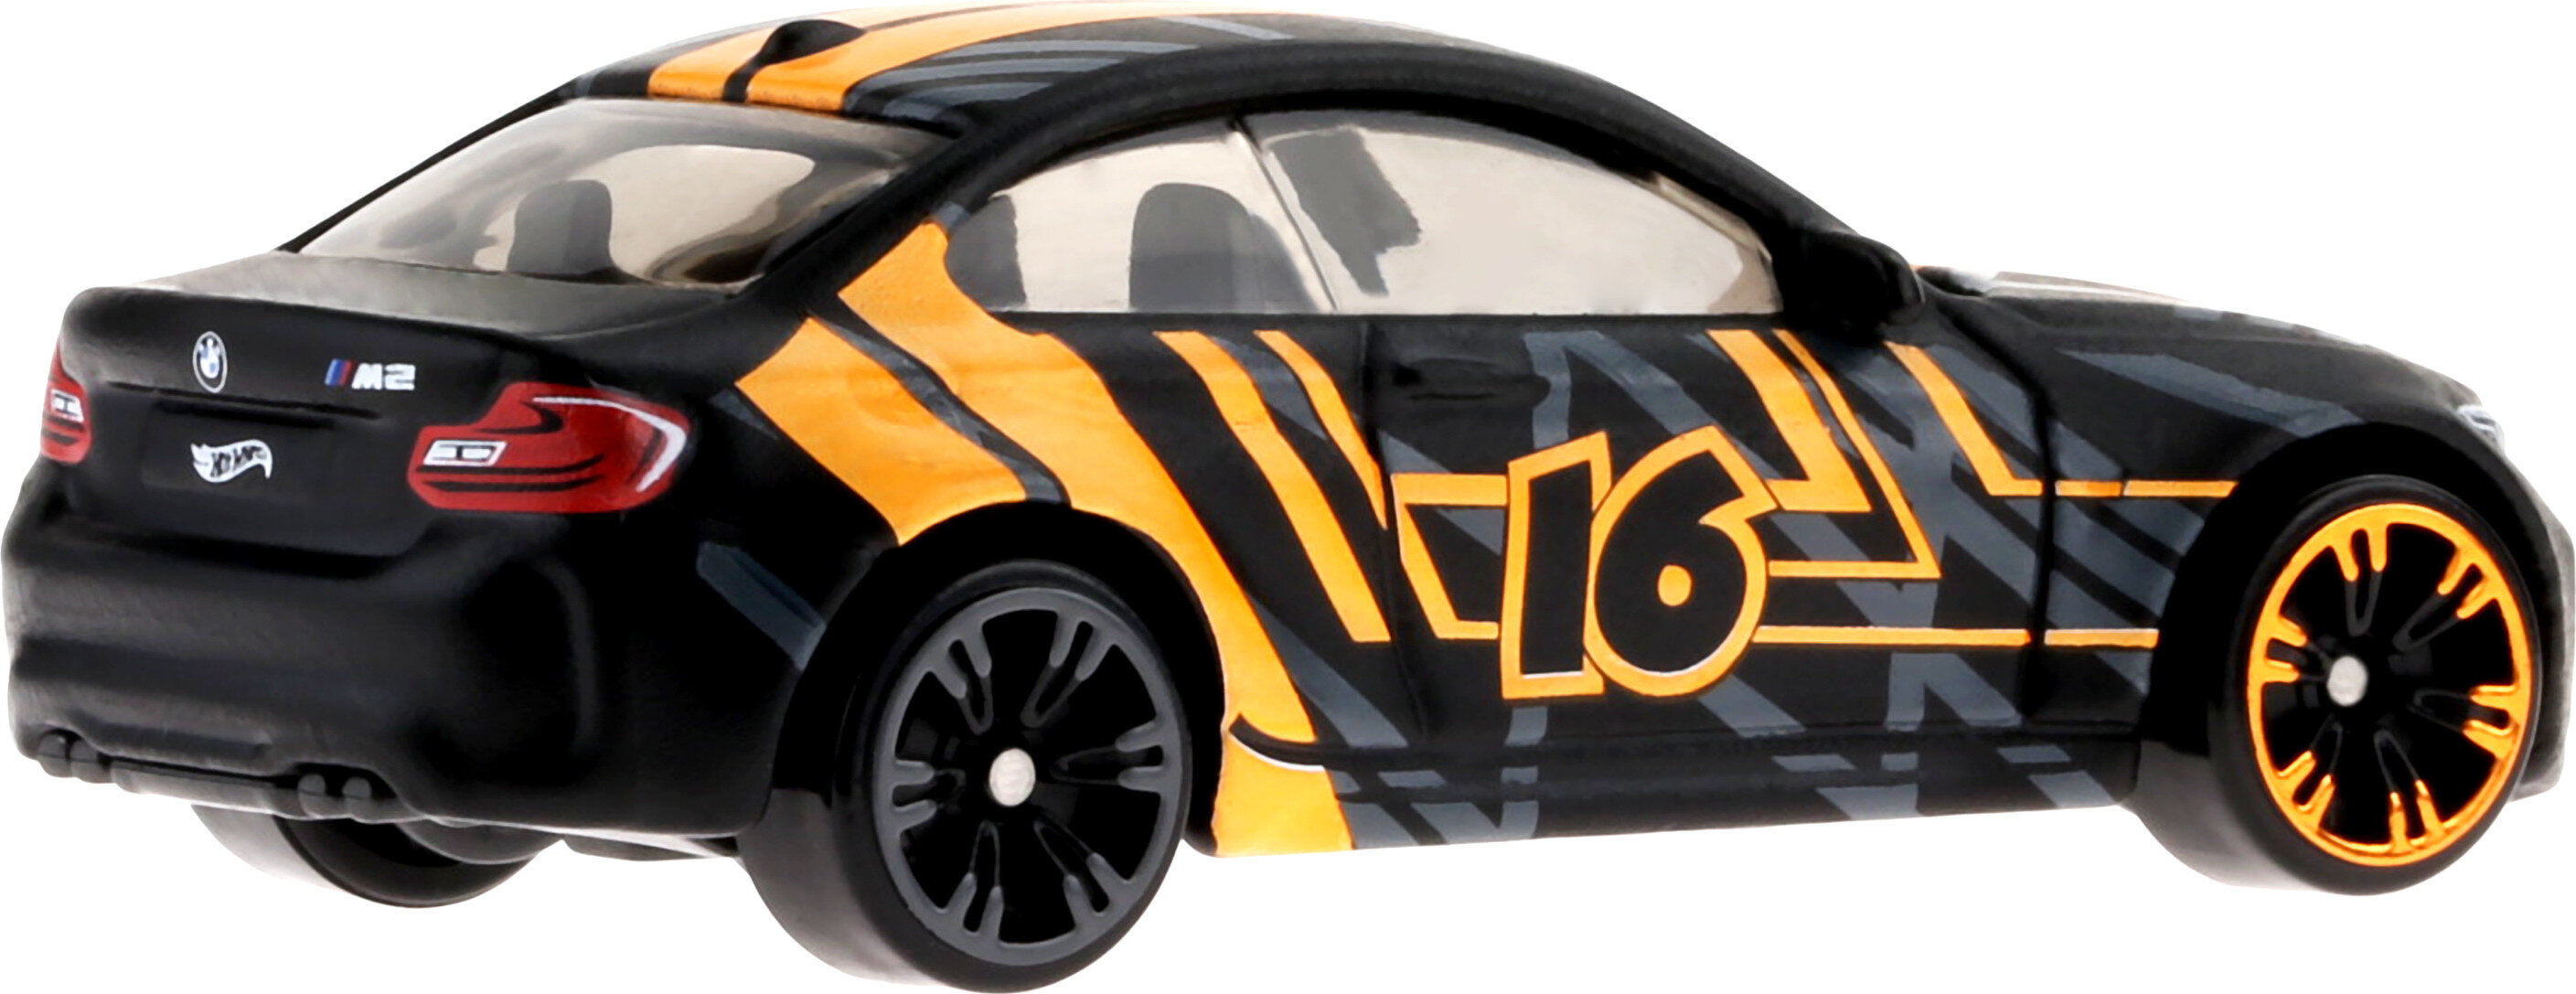 Hot Wheels Cars, Neon Speeders, 1 Die-Cast Toy Car in 1:64 Scale with Neon Designs - image 3 of 6